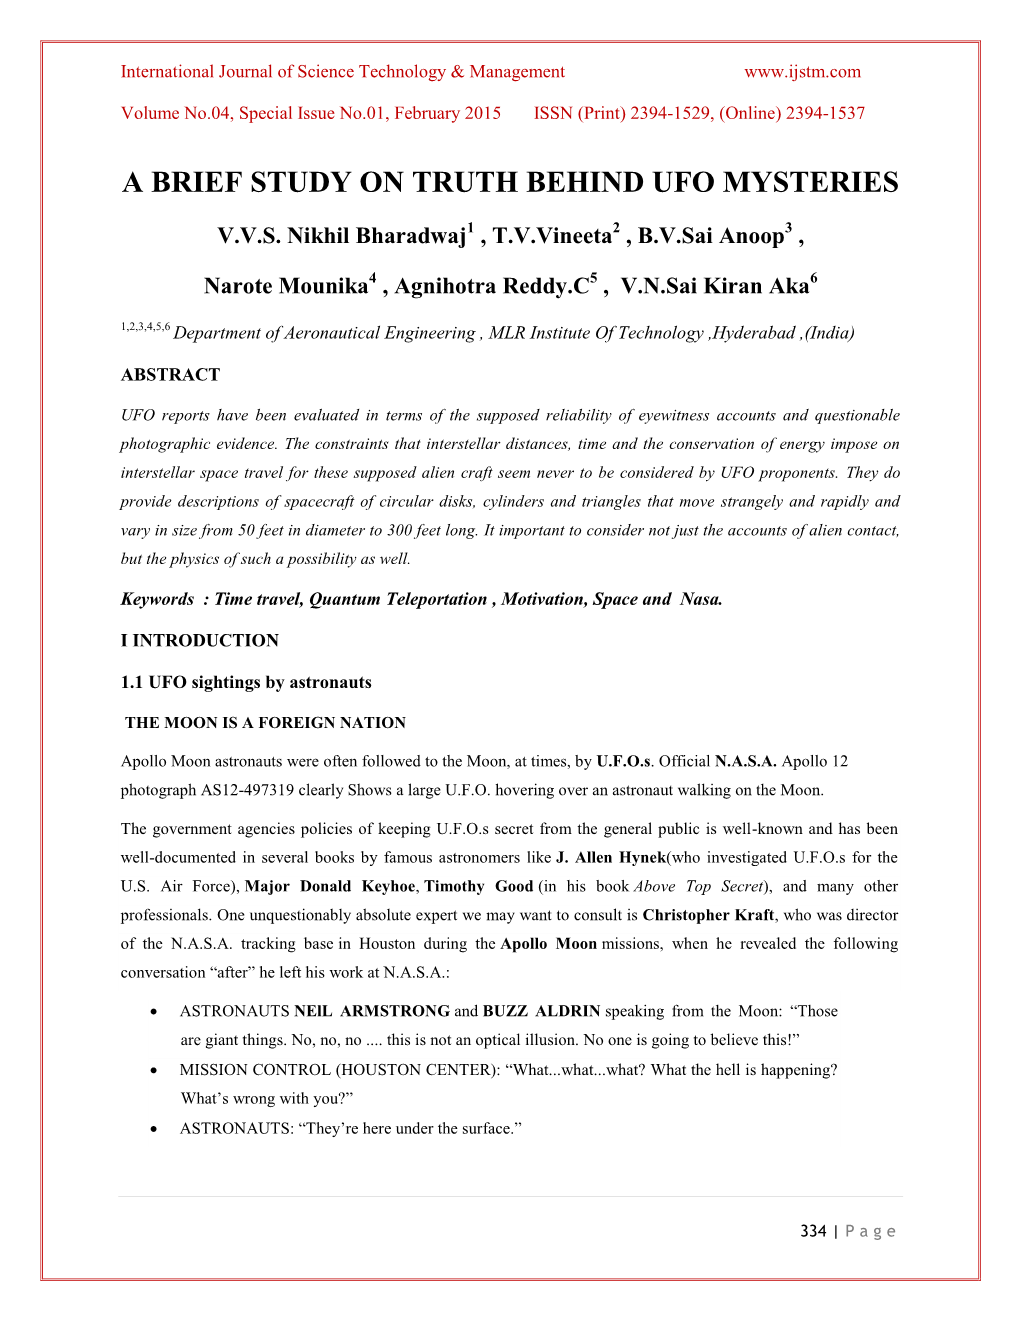 A Brief Study on Truth Behind Ufo Mysteries